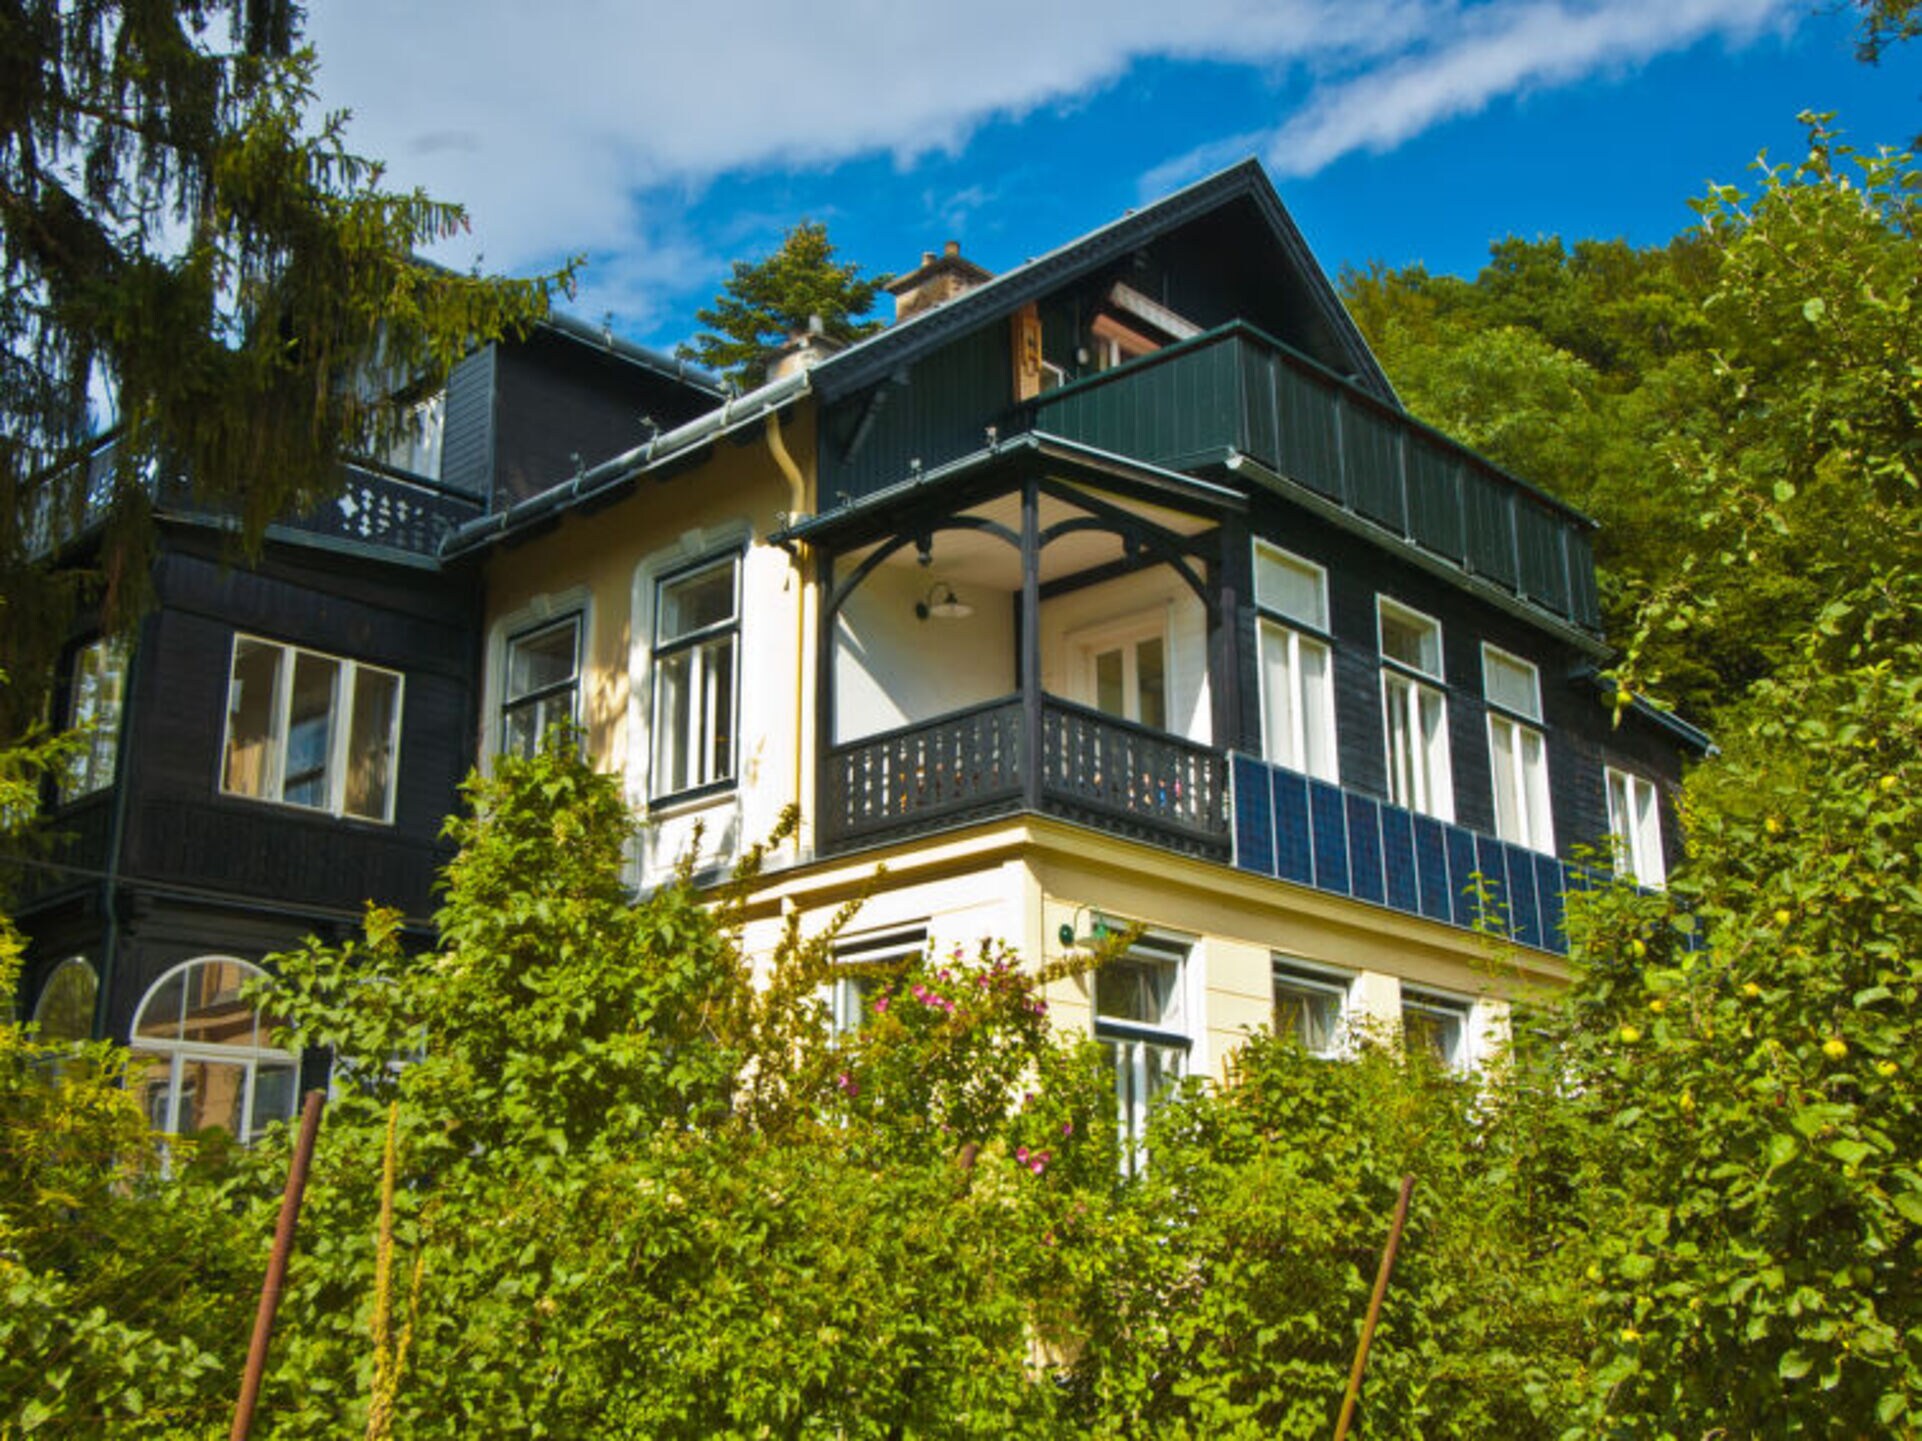 Property Image 2 - Property Manager Villa with First Class Amenities, Niederösterreich Villa 1001